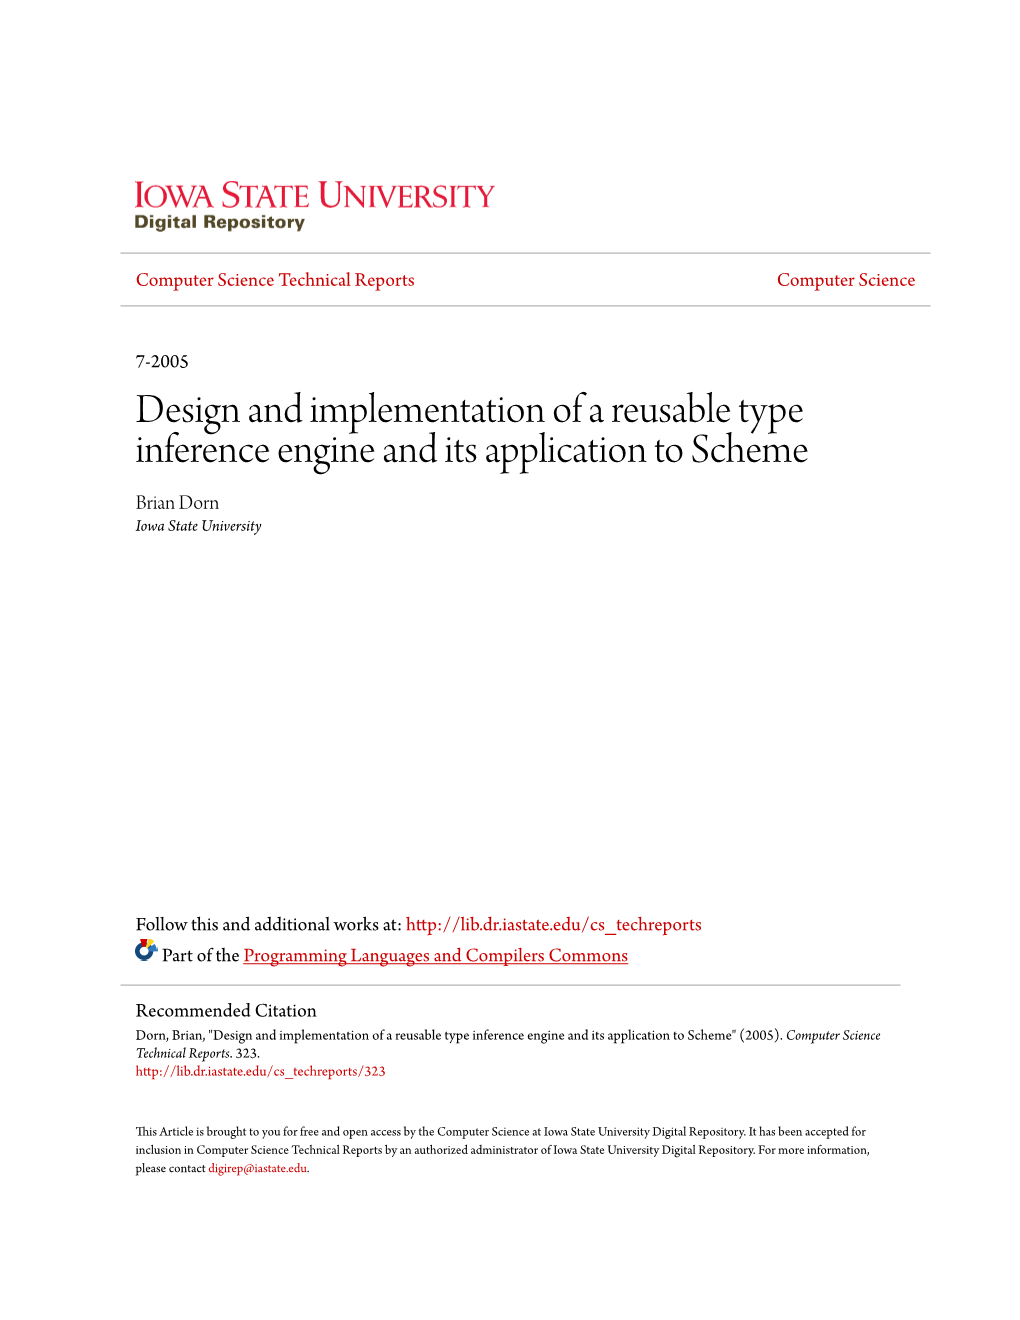 Design and Implementation of a Reusable Type Inference Engine and Its Application to Scheme Brian Dorn Iowa State University